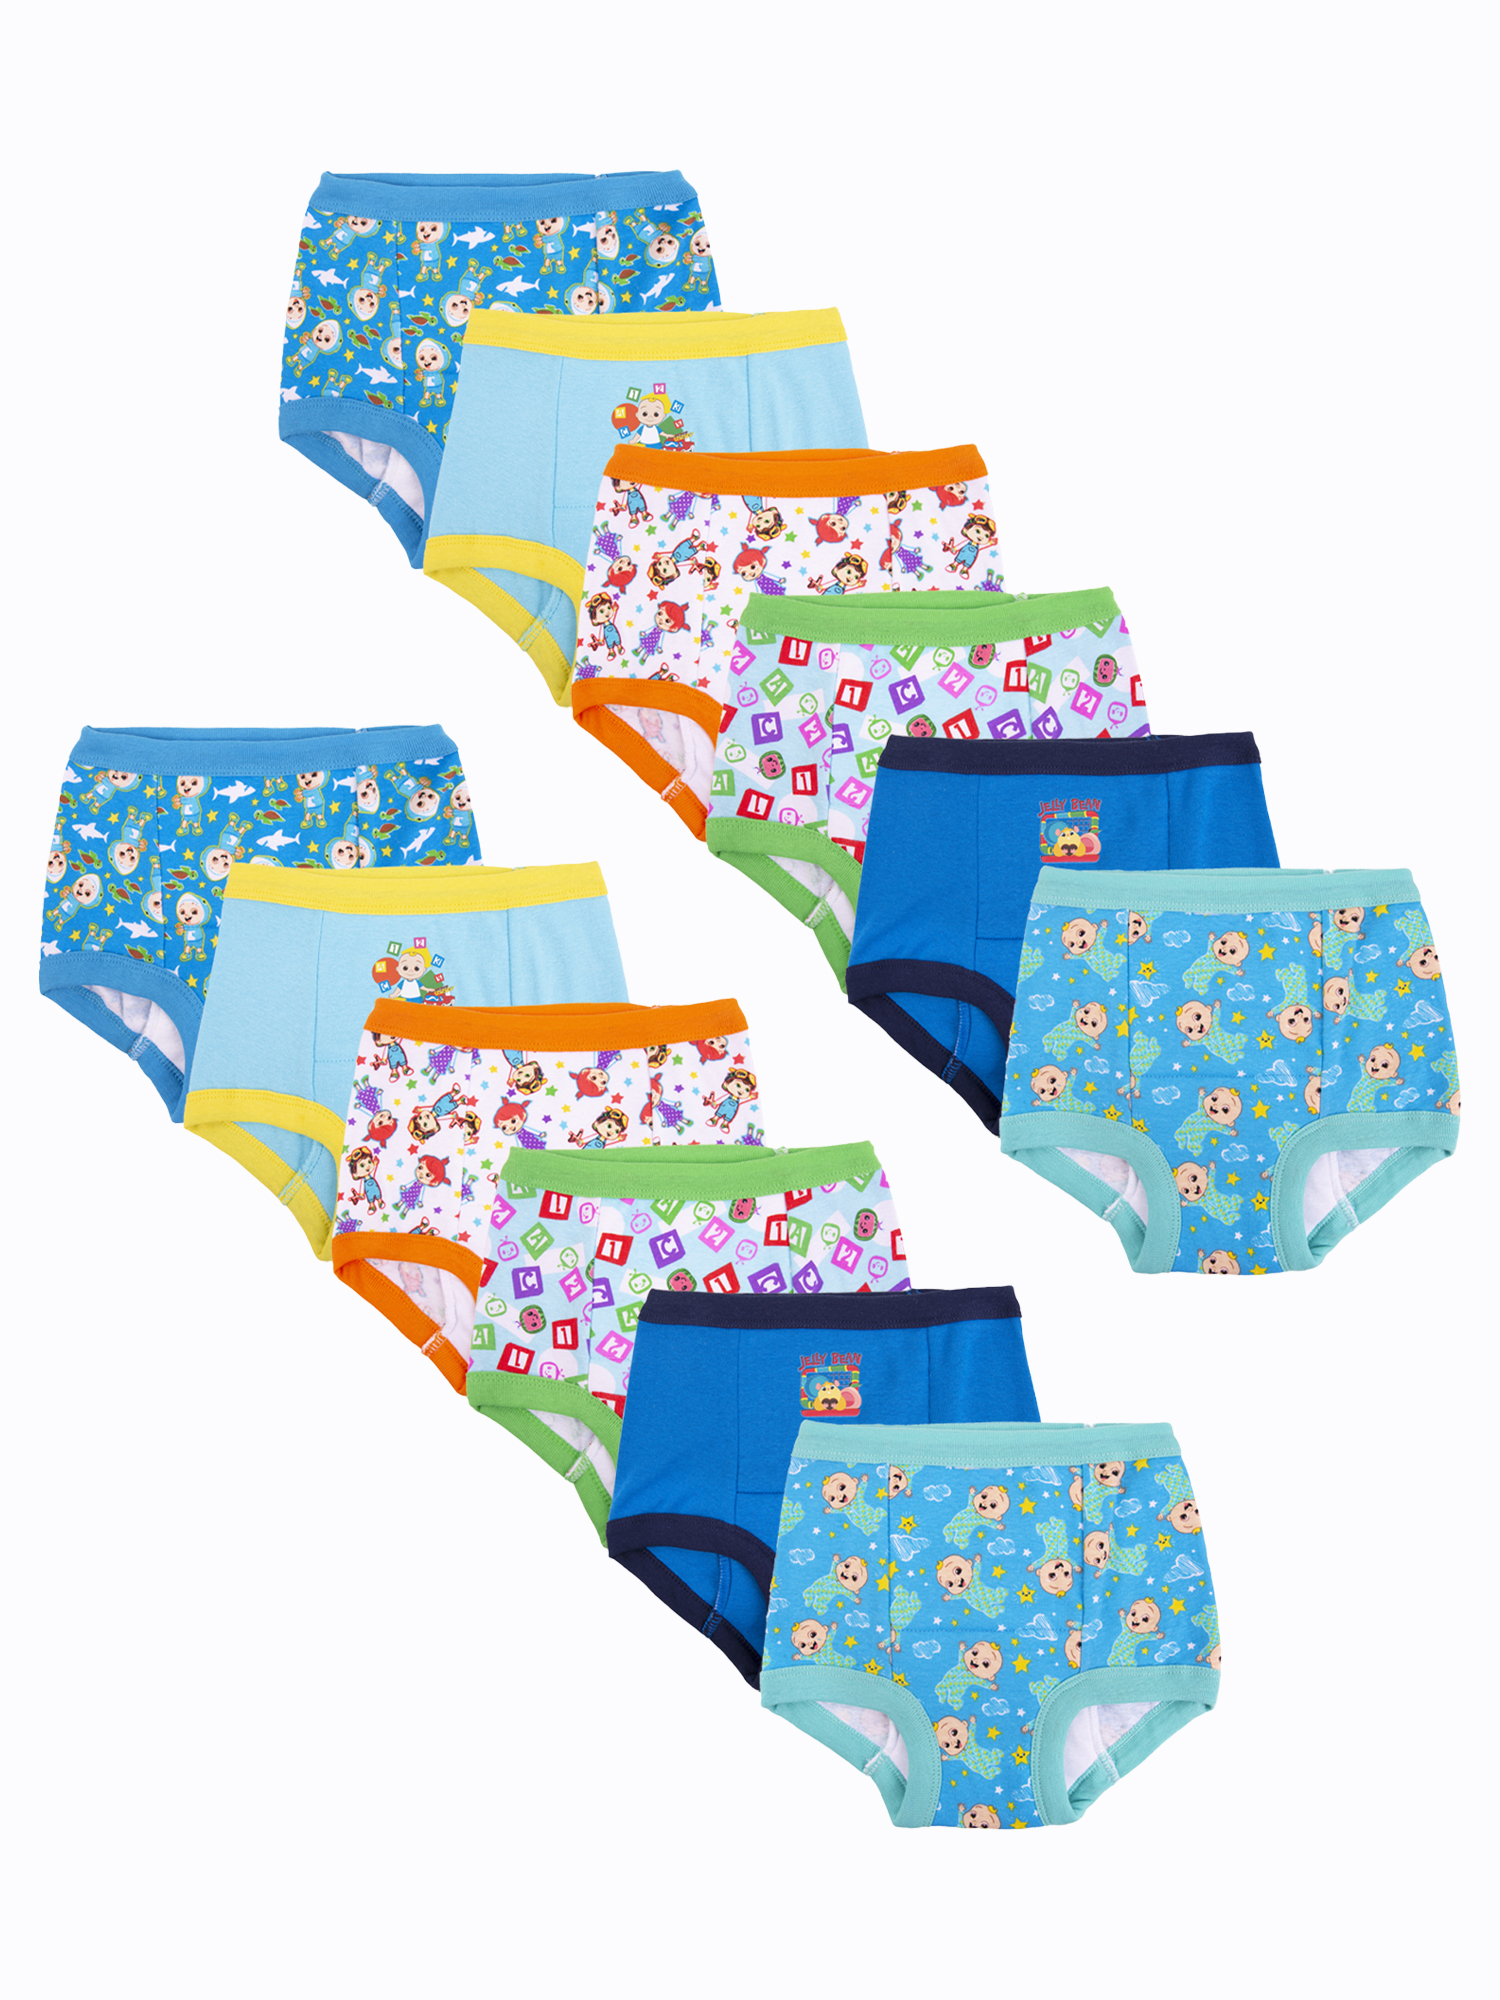 Toddler Boy Character Training Pants 12-Pack, Sizes 2T-4T - image 1 of 3